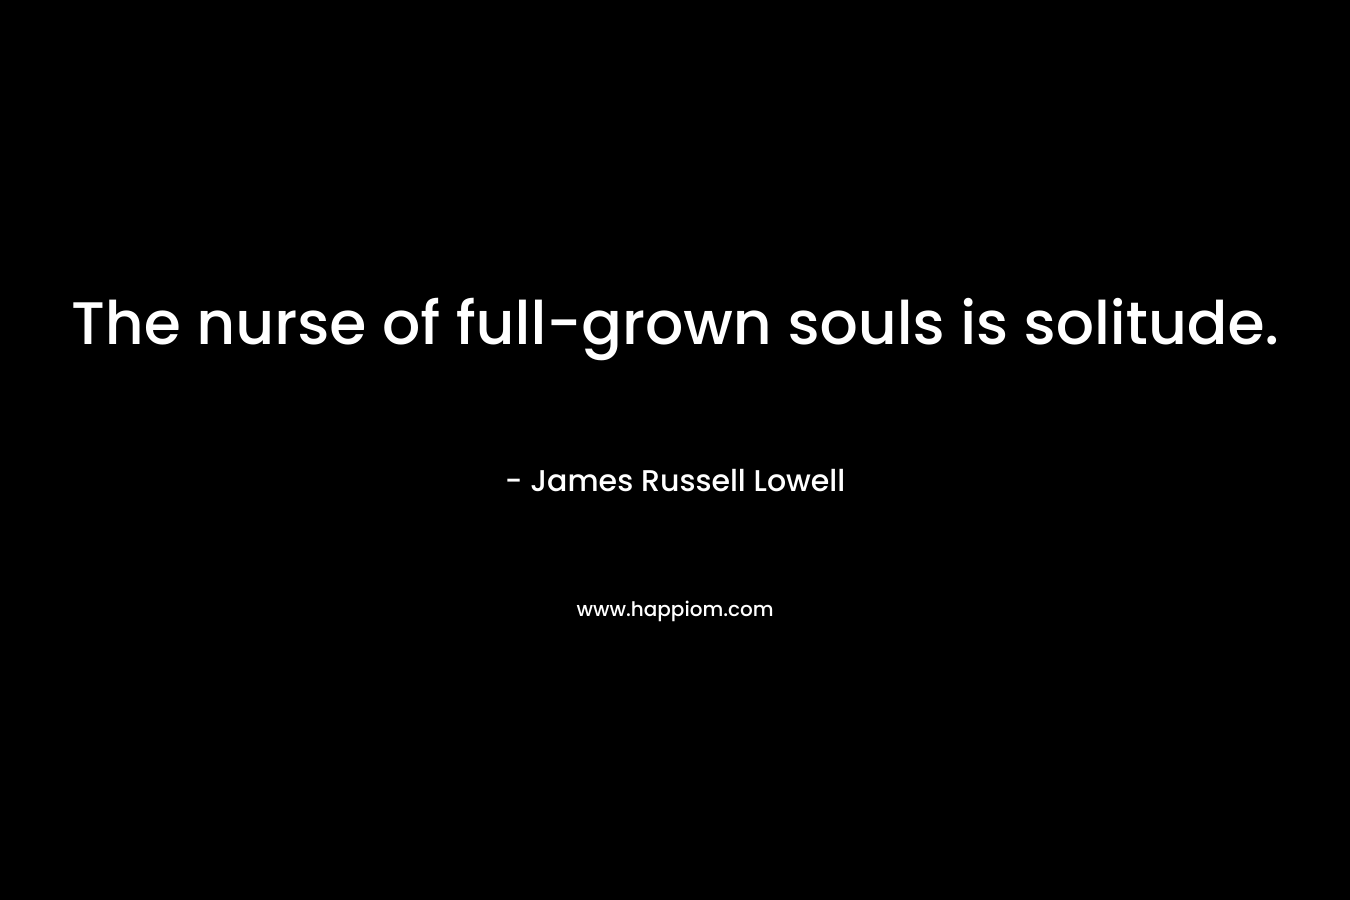 The nurse of full-grown souls is solitude. – James Russell Lowell